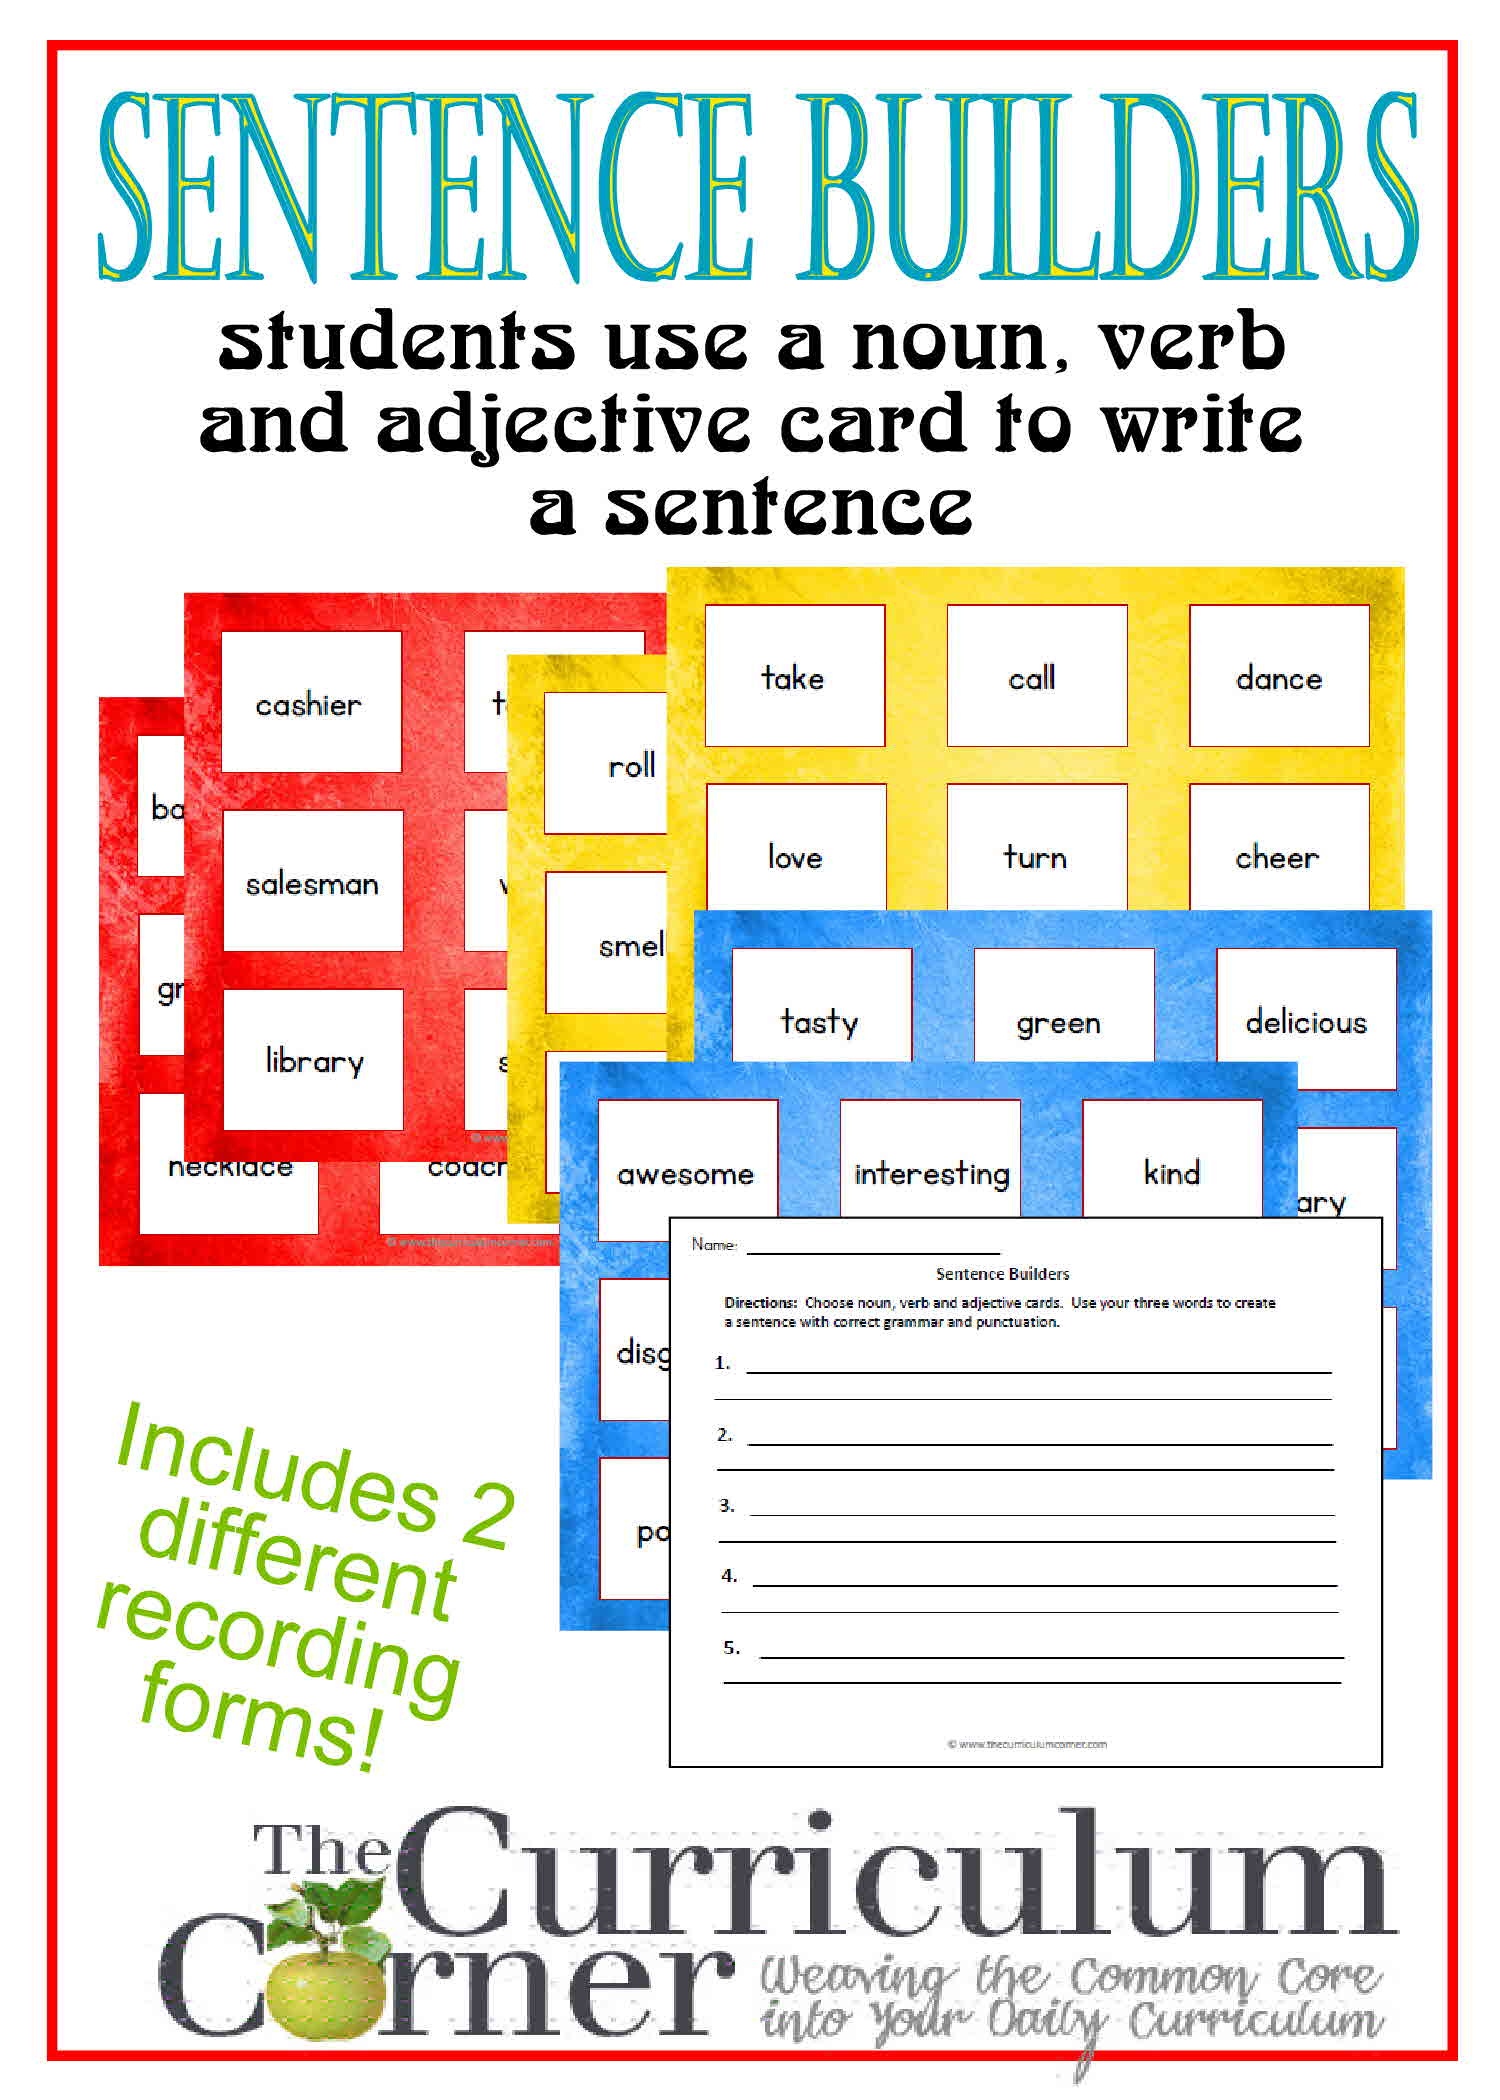 Sentence Builder Cards - The Curriculum Corner 4-5-6 - Free Printable Noun Picture Cards